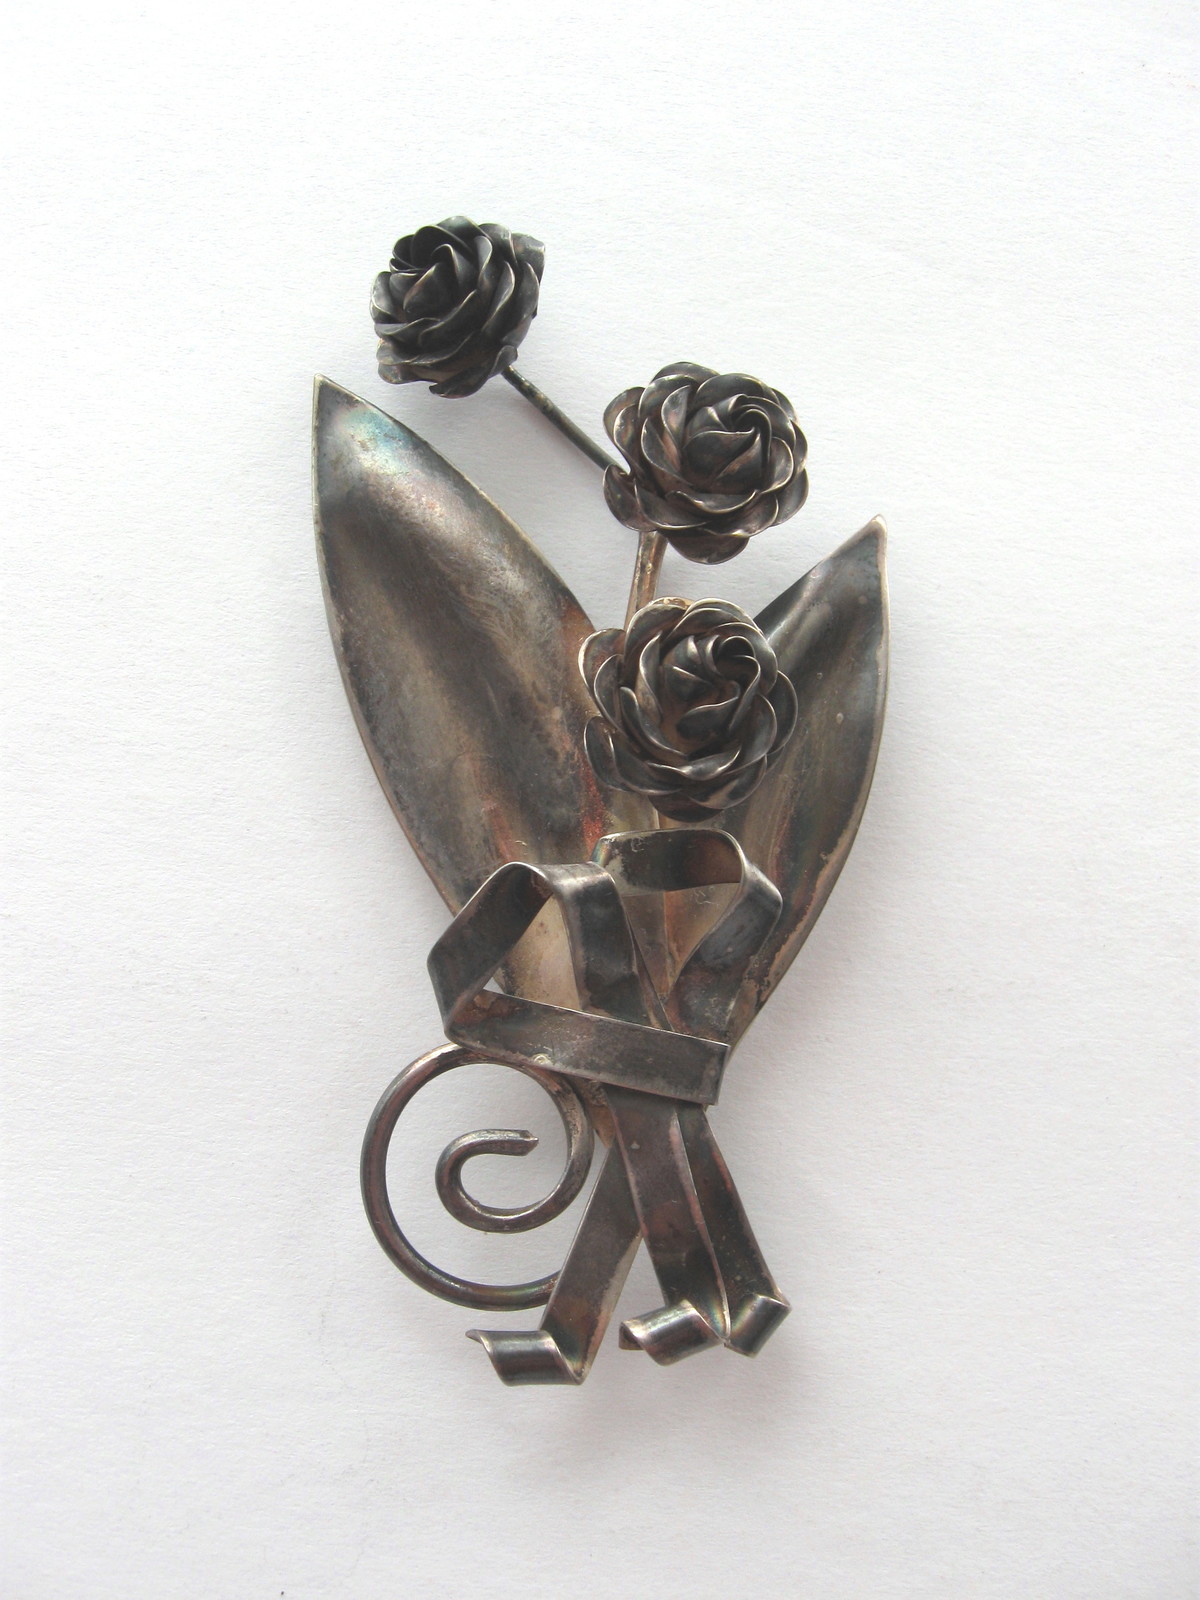 Primary image for Vintage Coro Sterling Brooch Pin with Flowers Leaves Ribbons - Vintage Coro Pin 